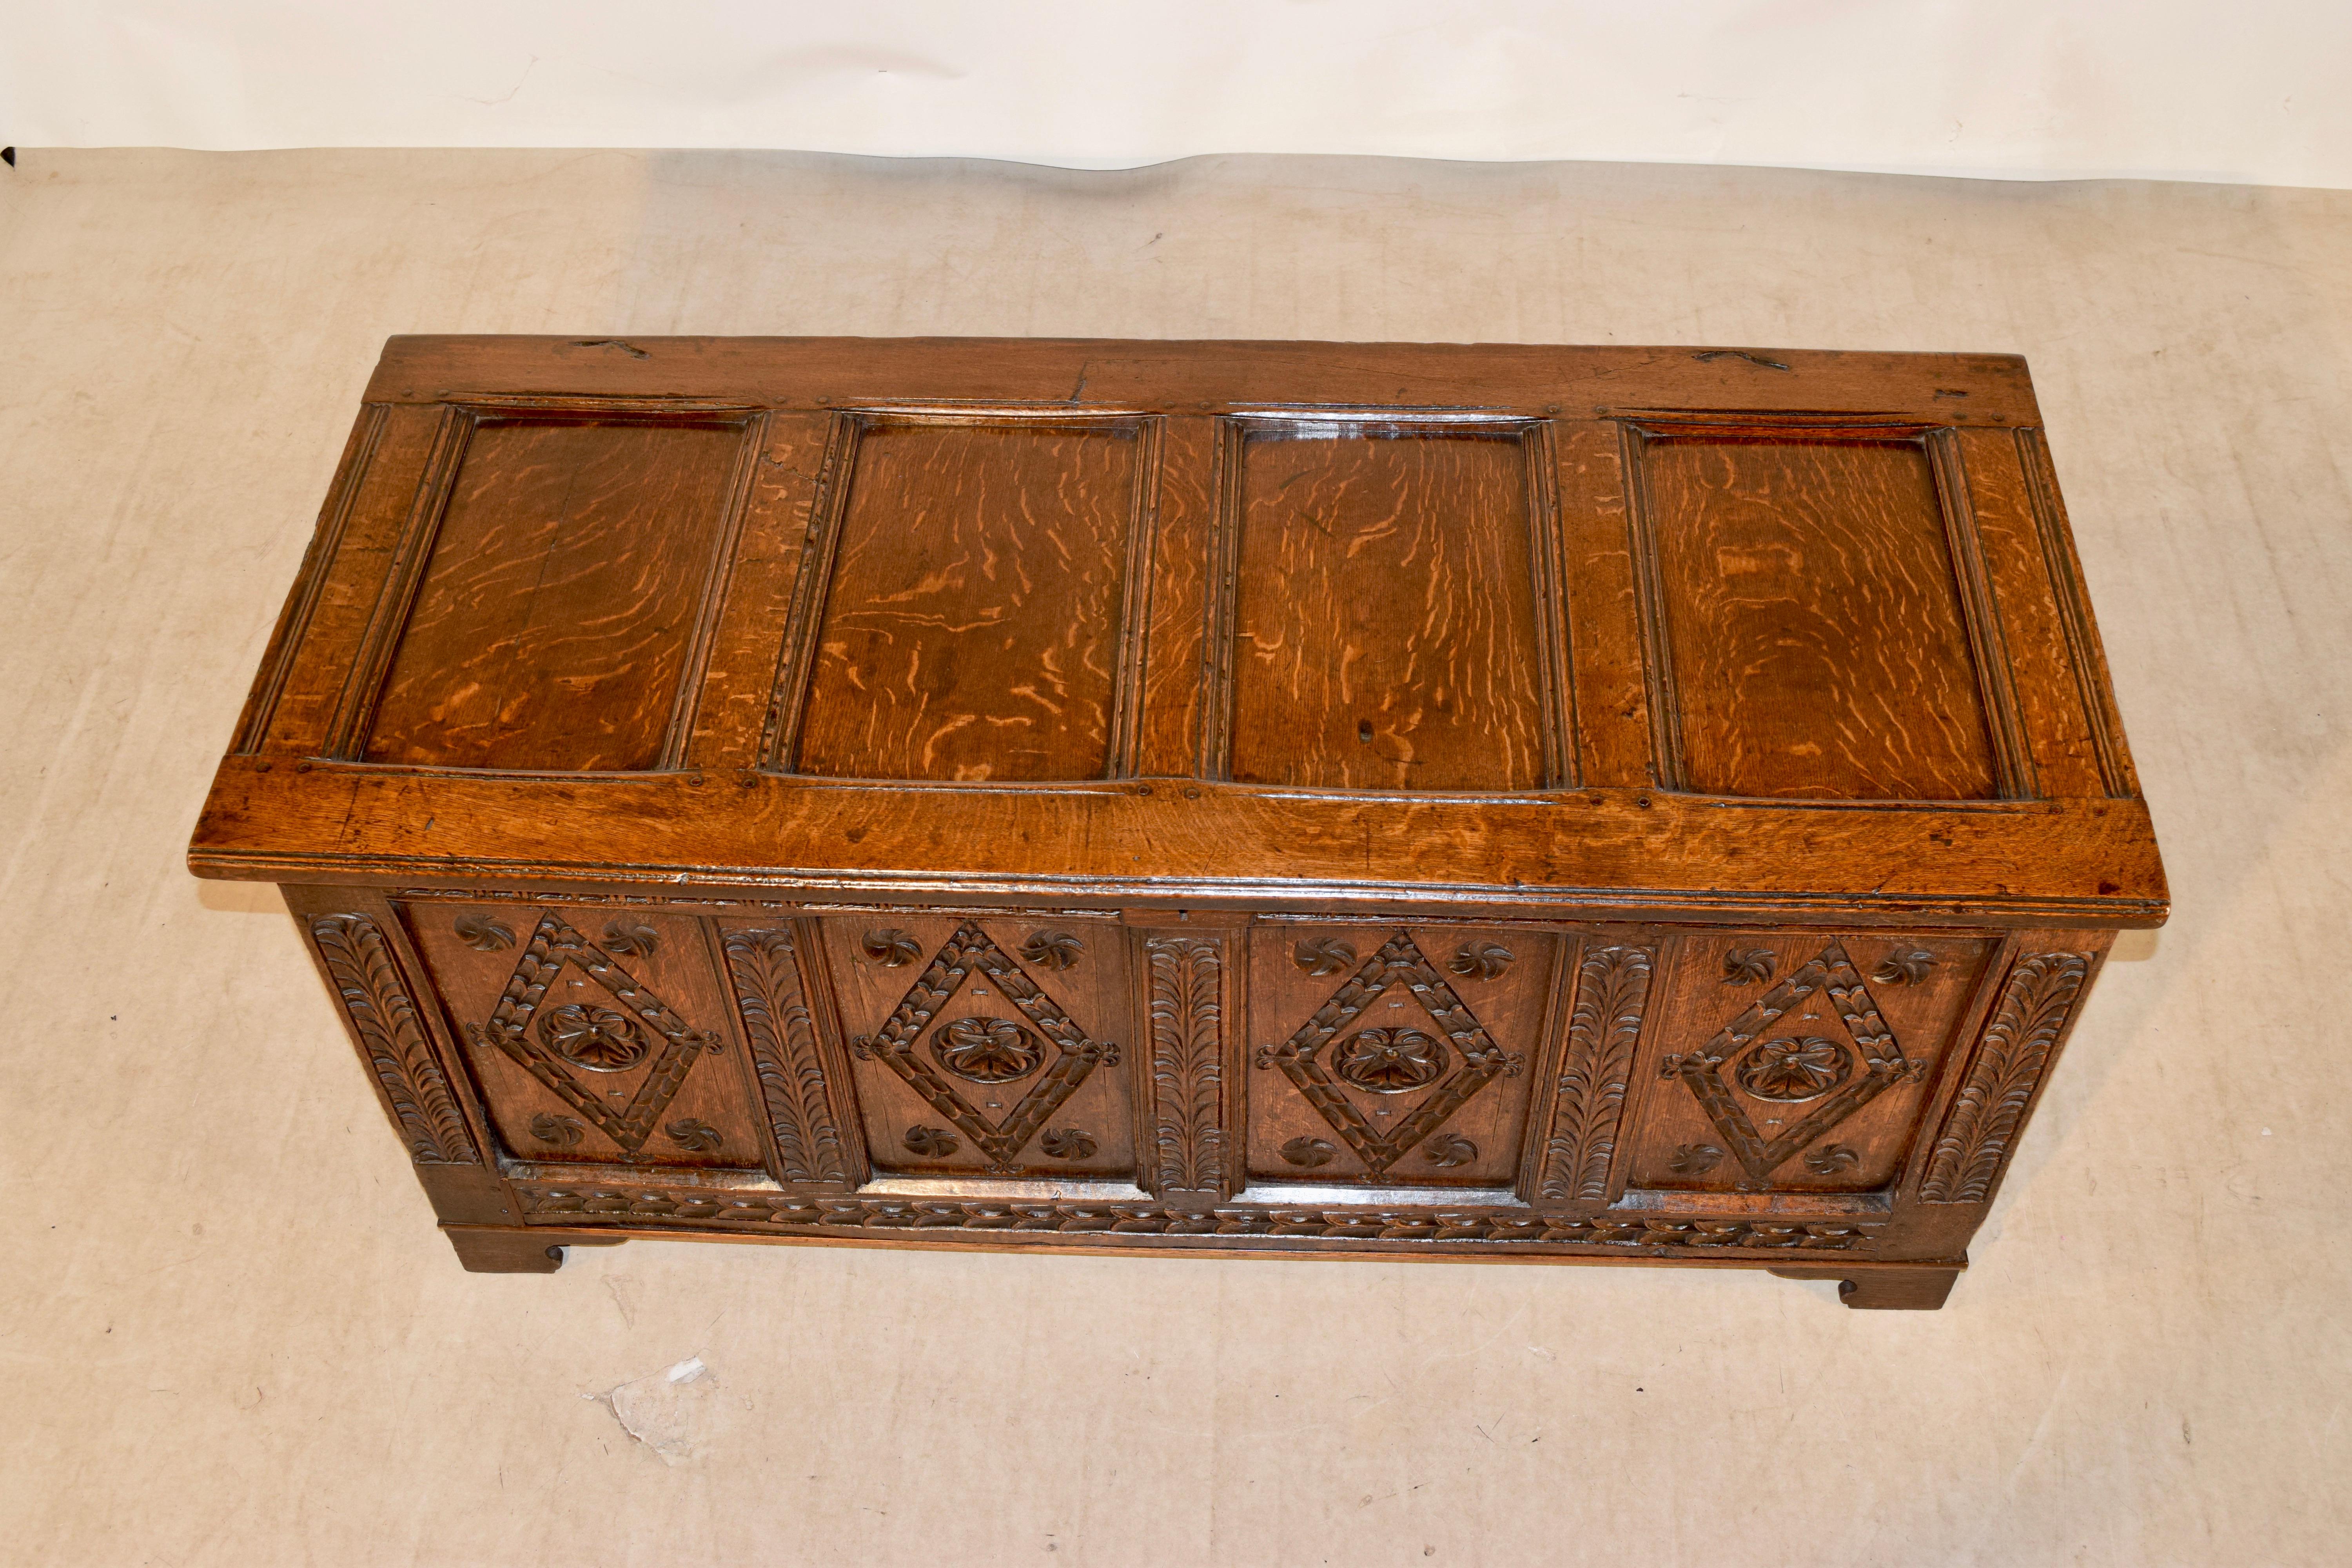 English Late 17th-Early 18th Century Oak Blanket Chest